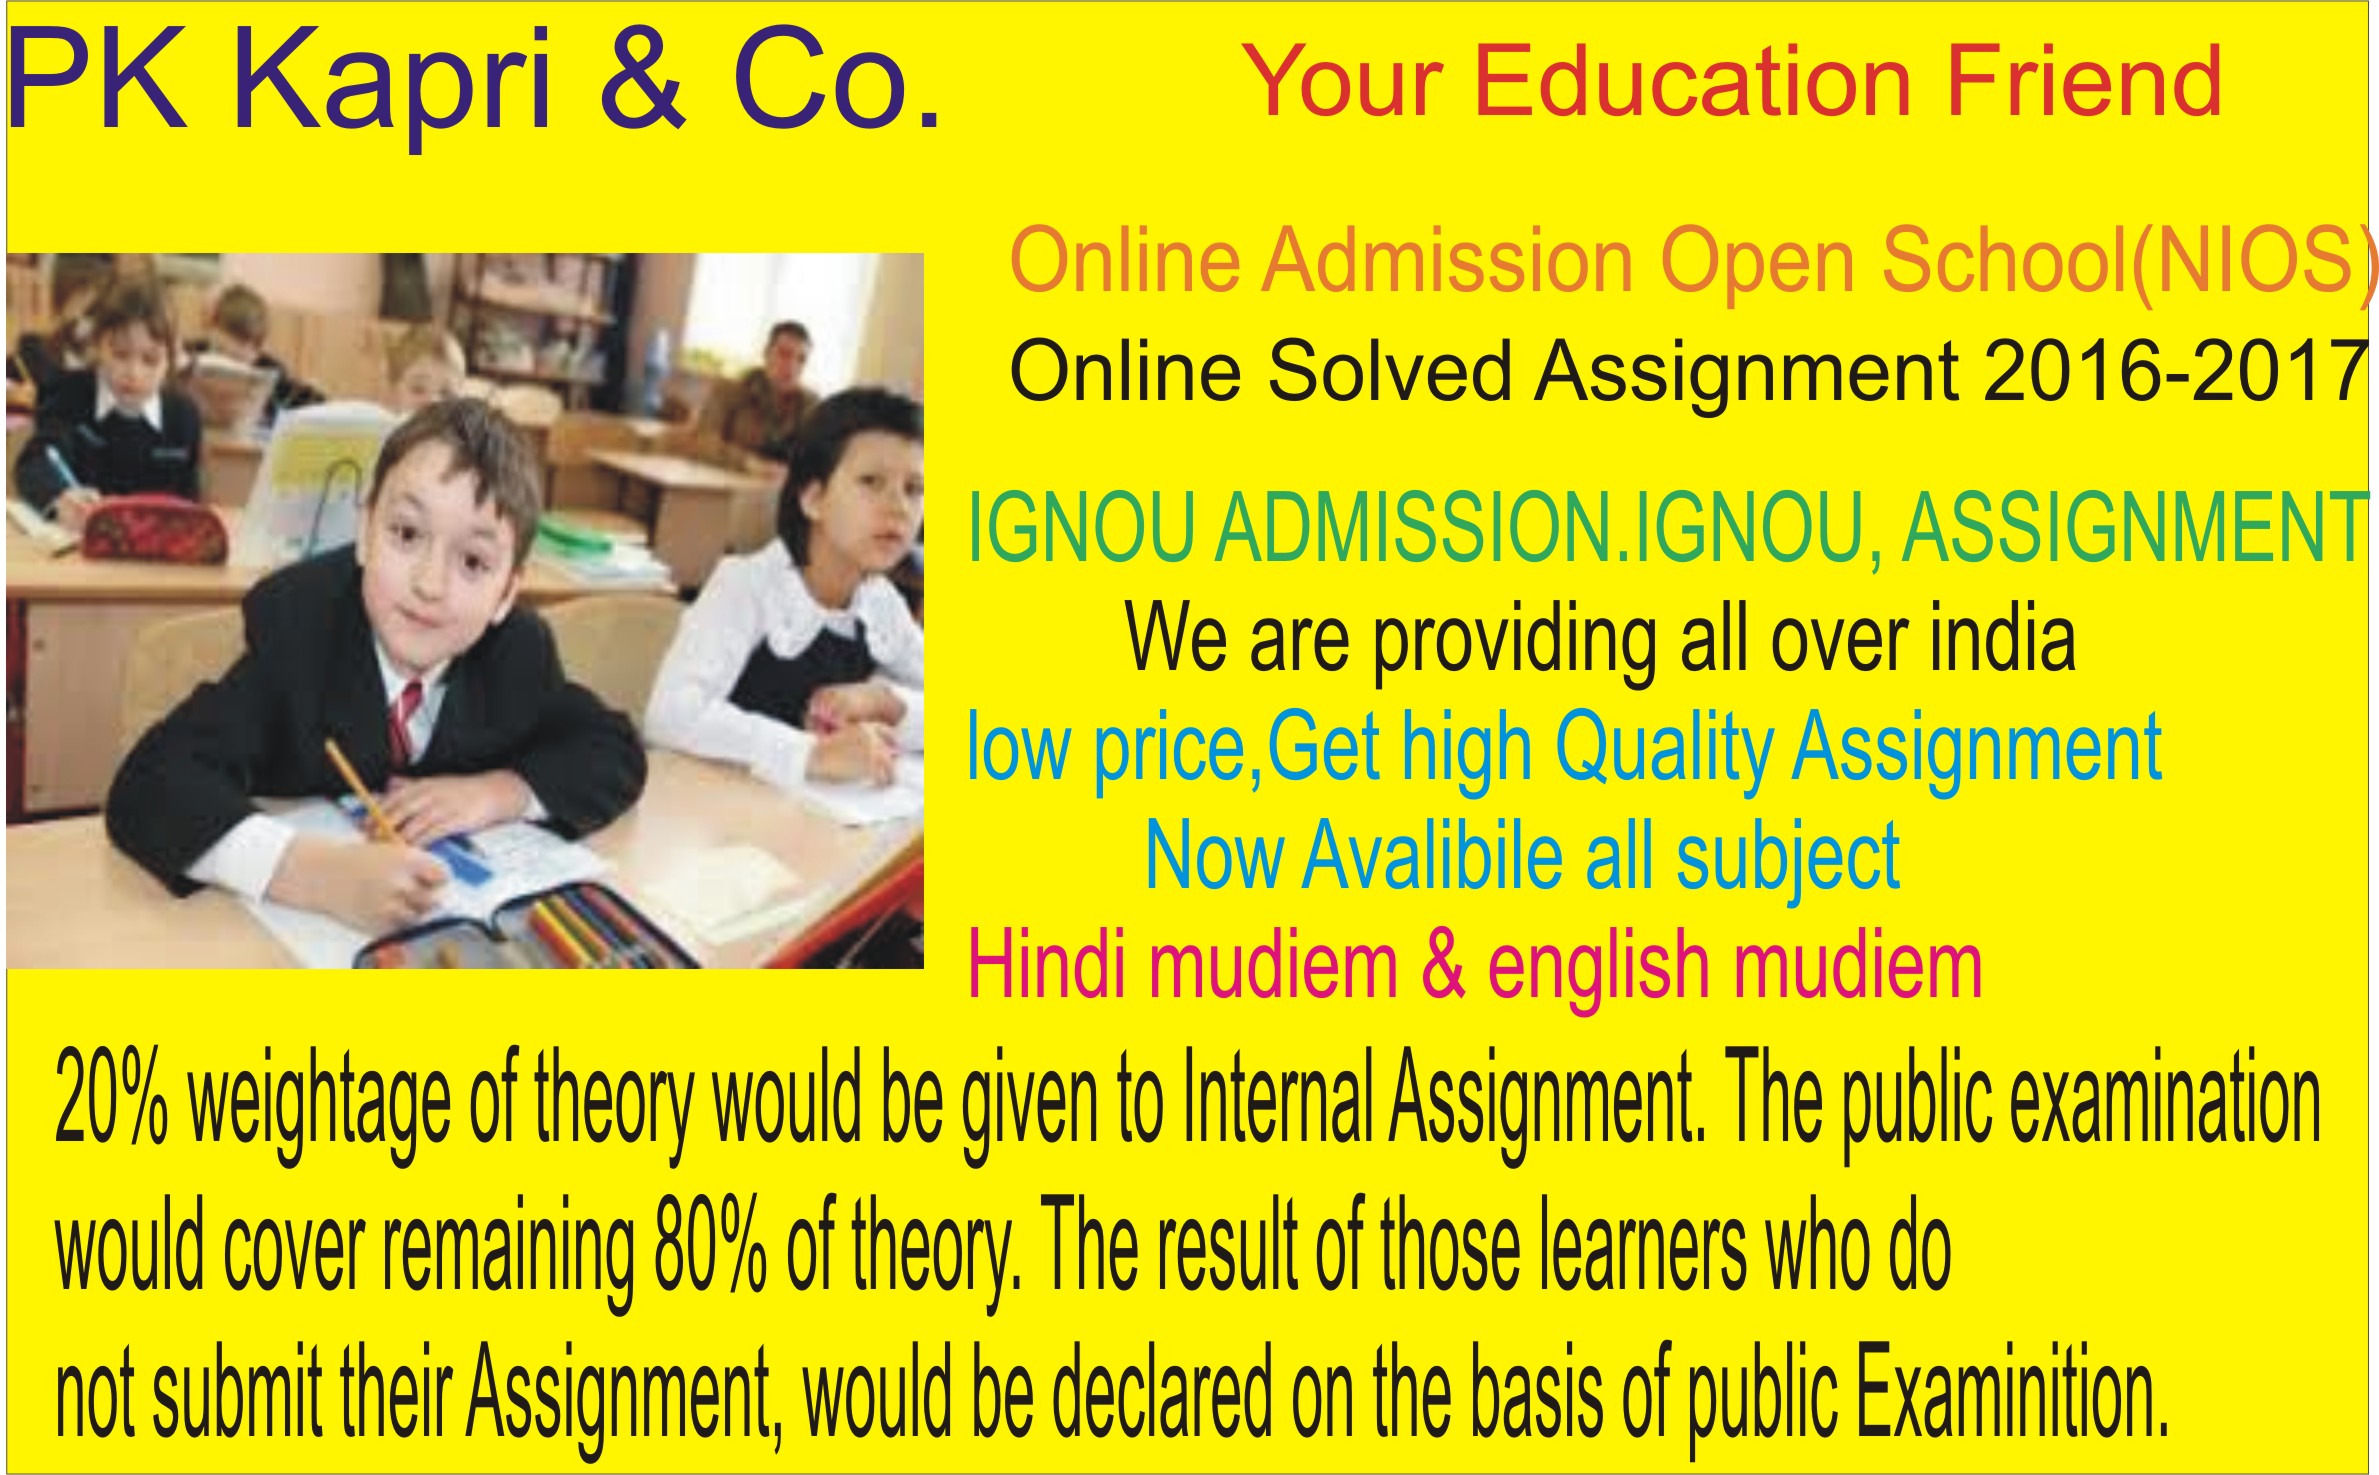 How many subjects are required to submit for obtaining the pass certificate or Good Marks?@9643289714